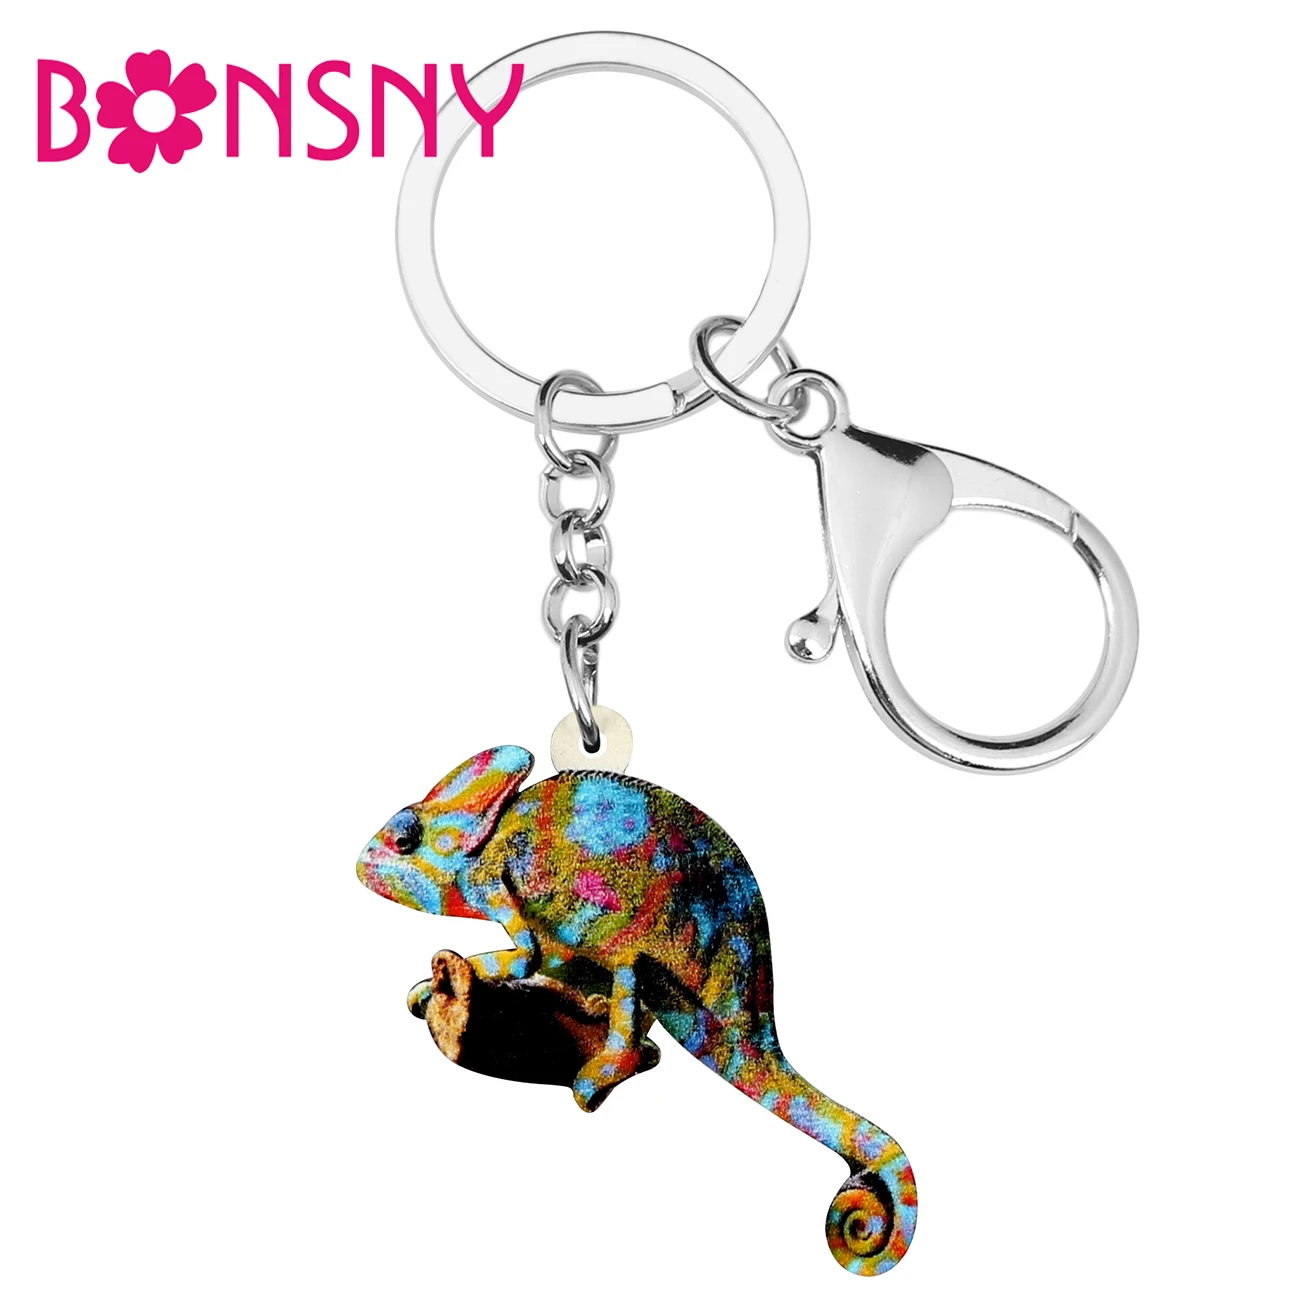 

Bonsny Acrylic Floral Chameleon Lizard Key Chains Keychains Holder Punk Animal Jewelry For Women Girls Bag Car Purse Charms Gift